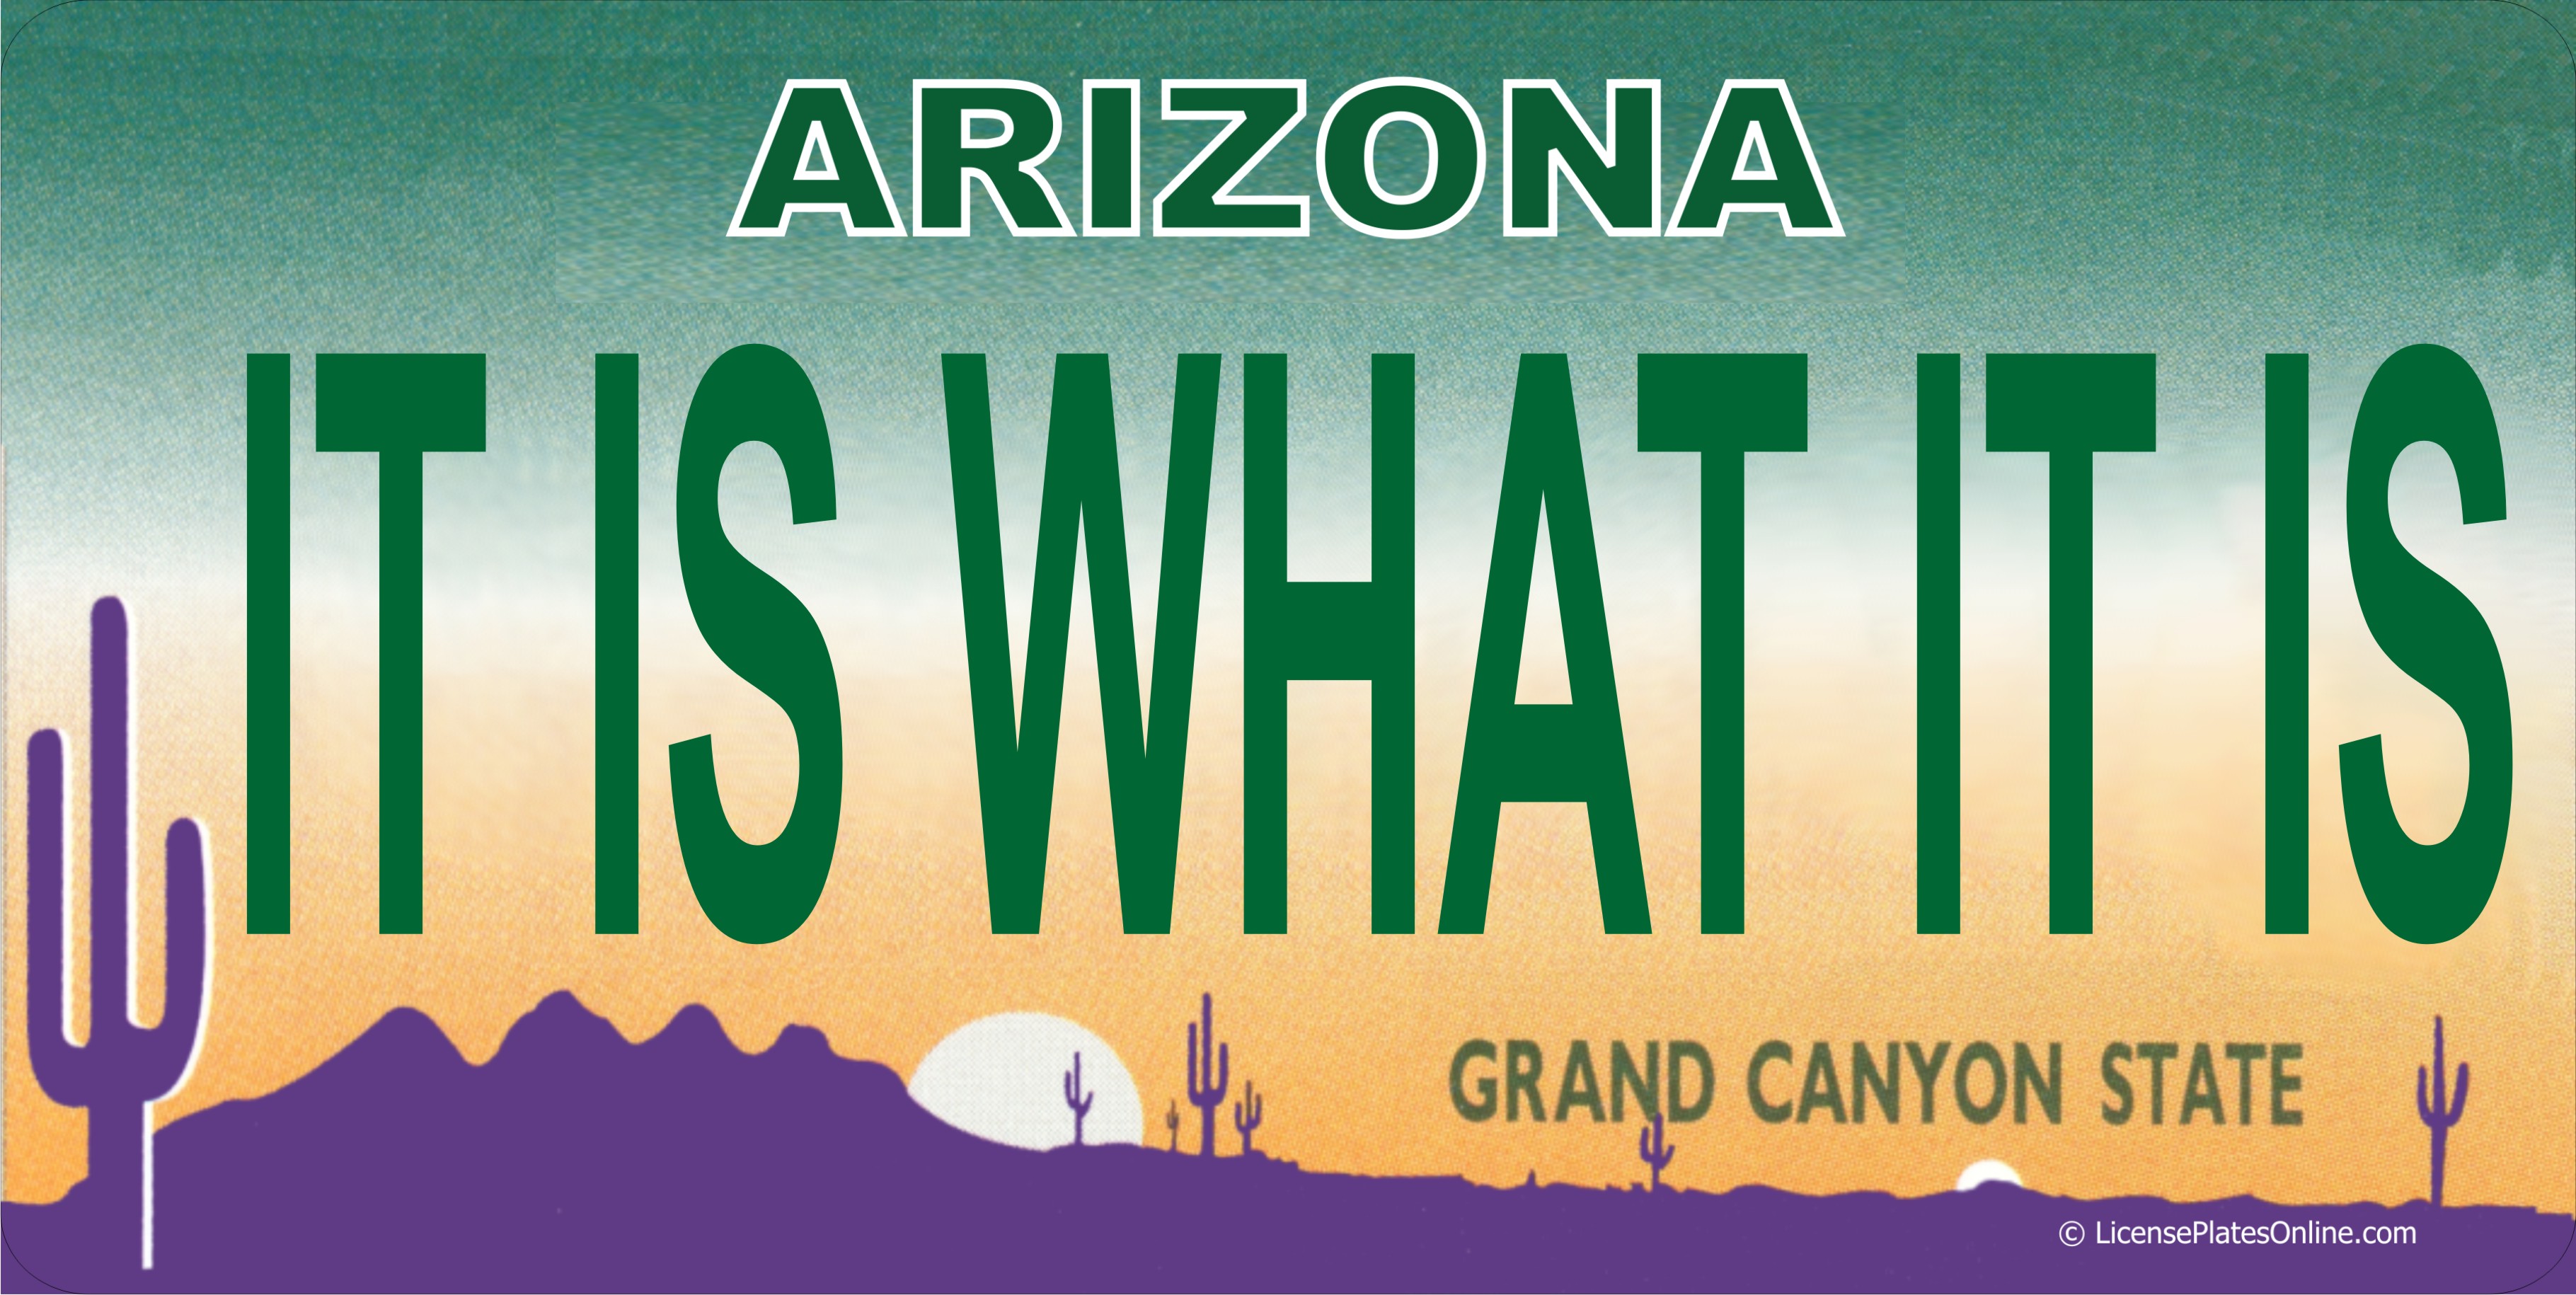 Arizona IT IS WHAT IT IS Photo LICENSE PLATE  Free Personalization on this PLATE